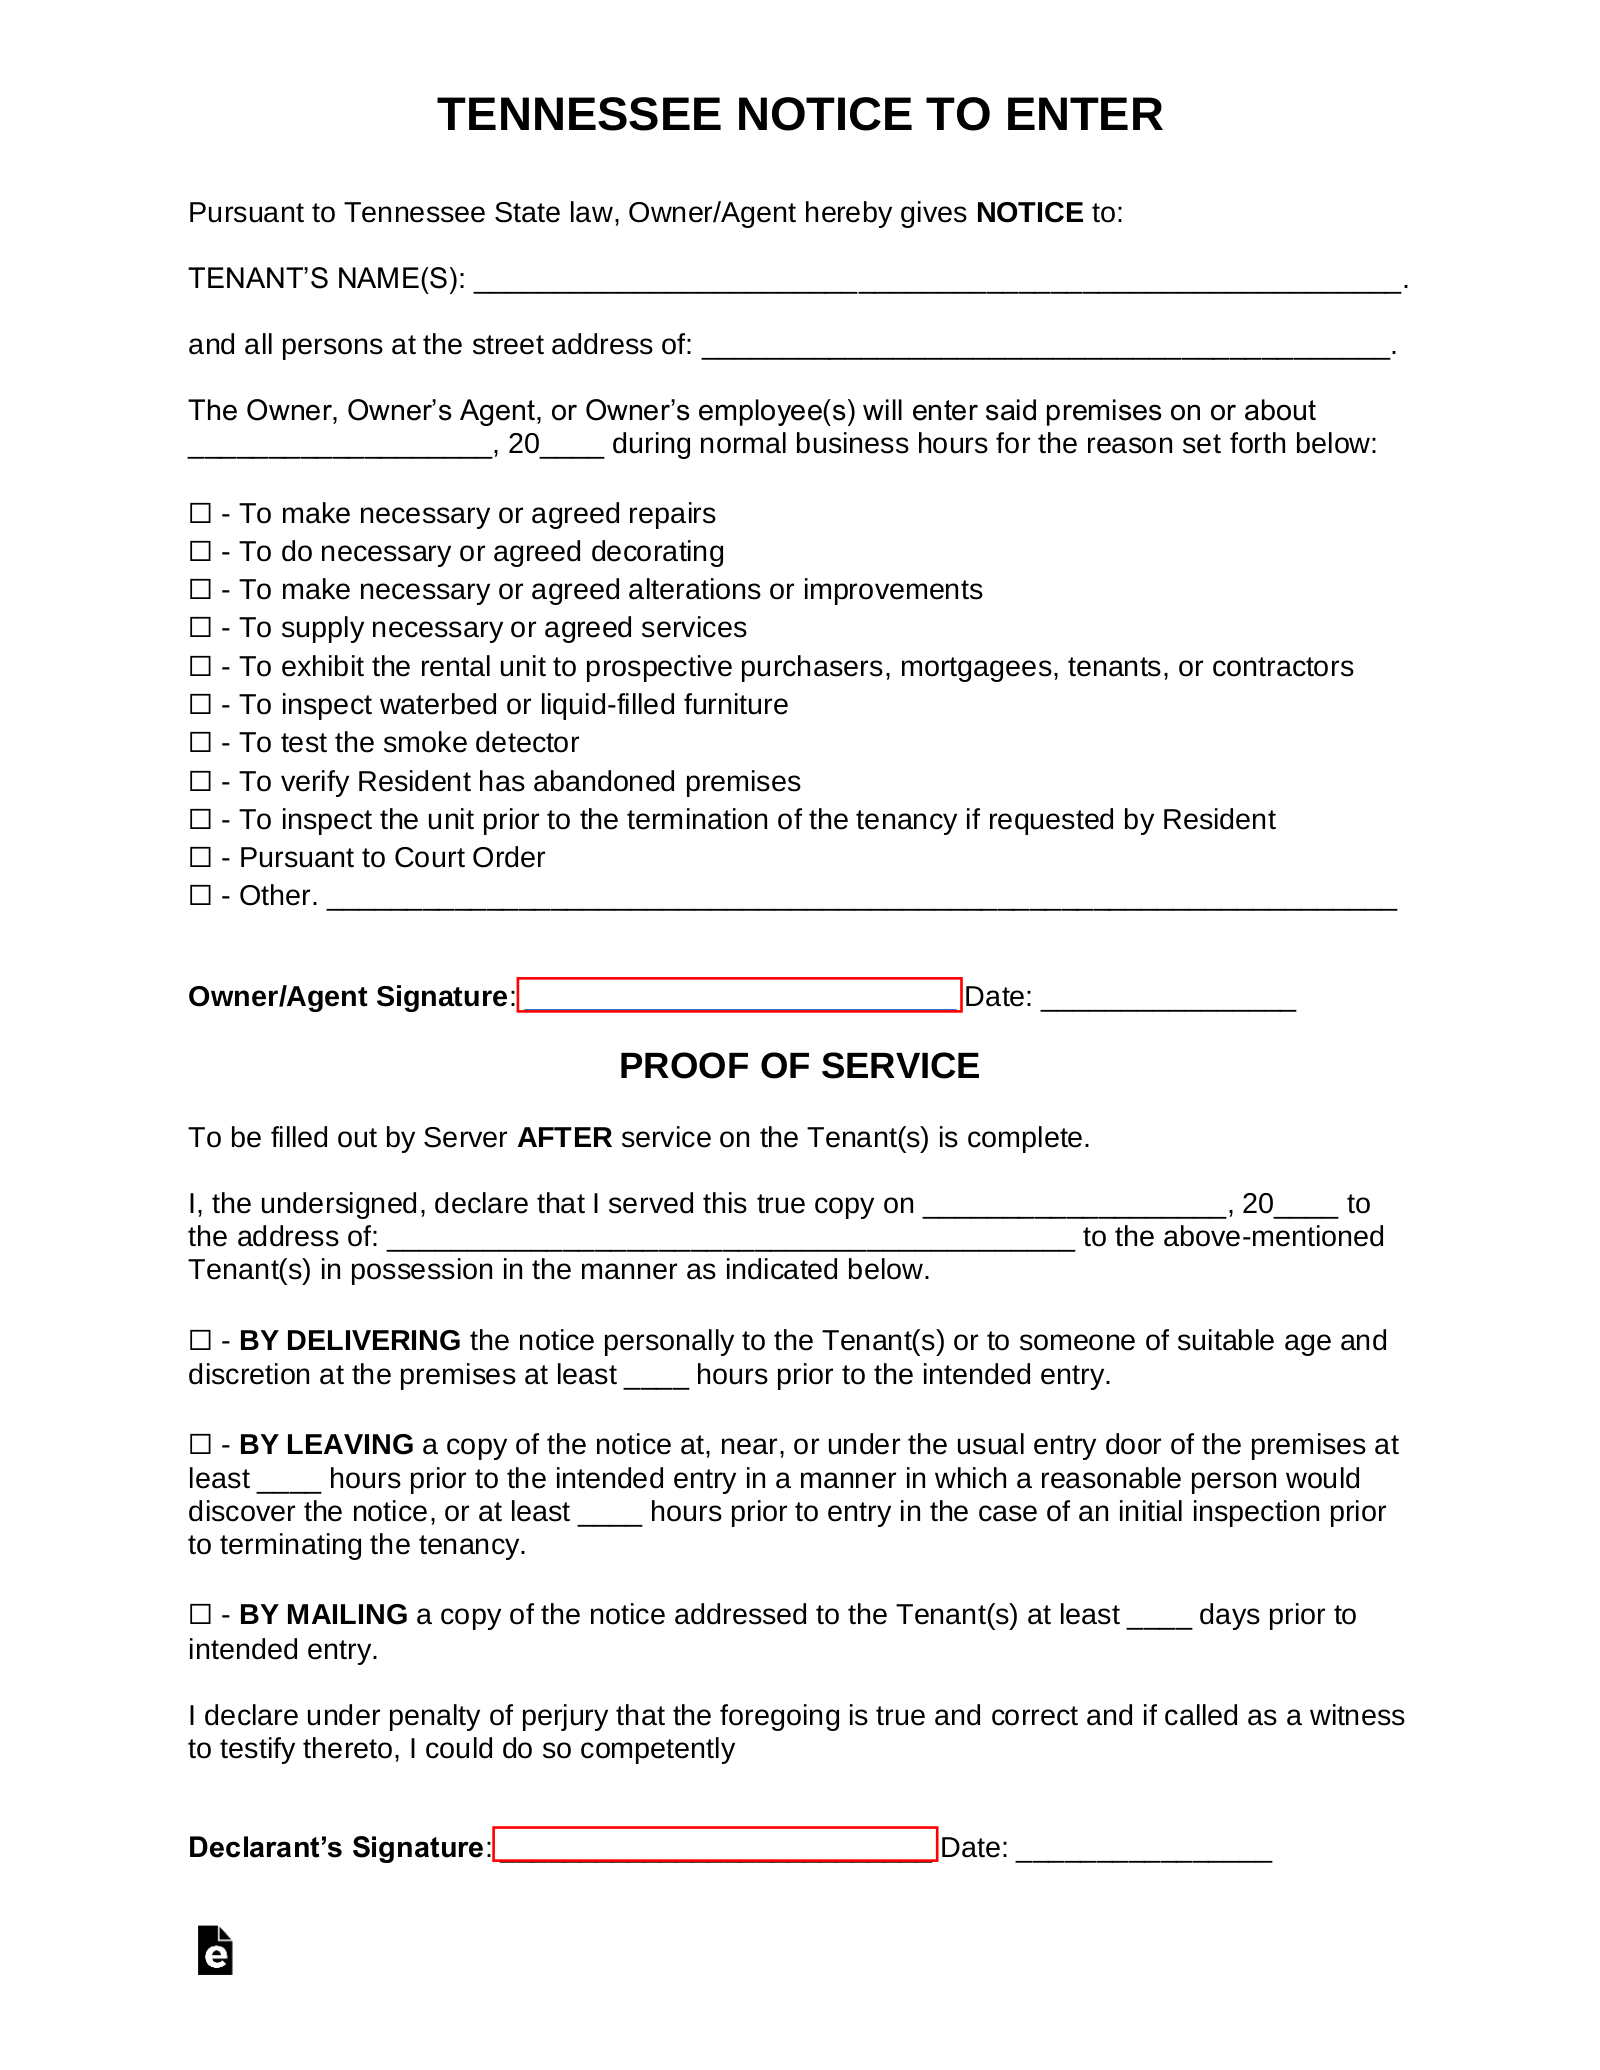 Tennessee Landlord Notice to Enter Form